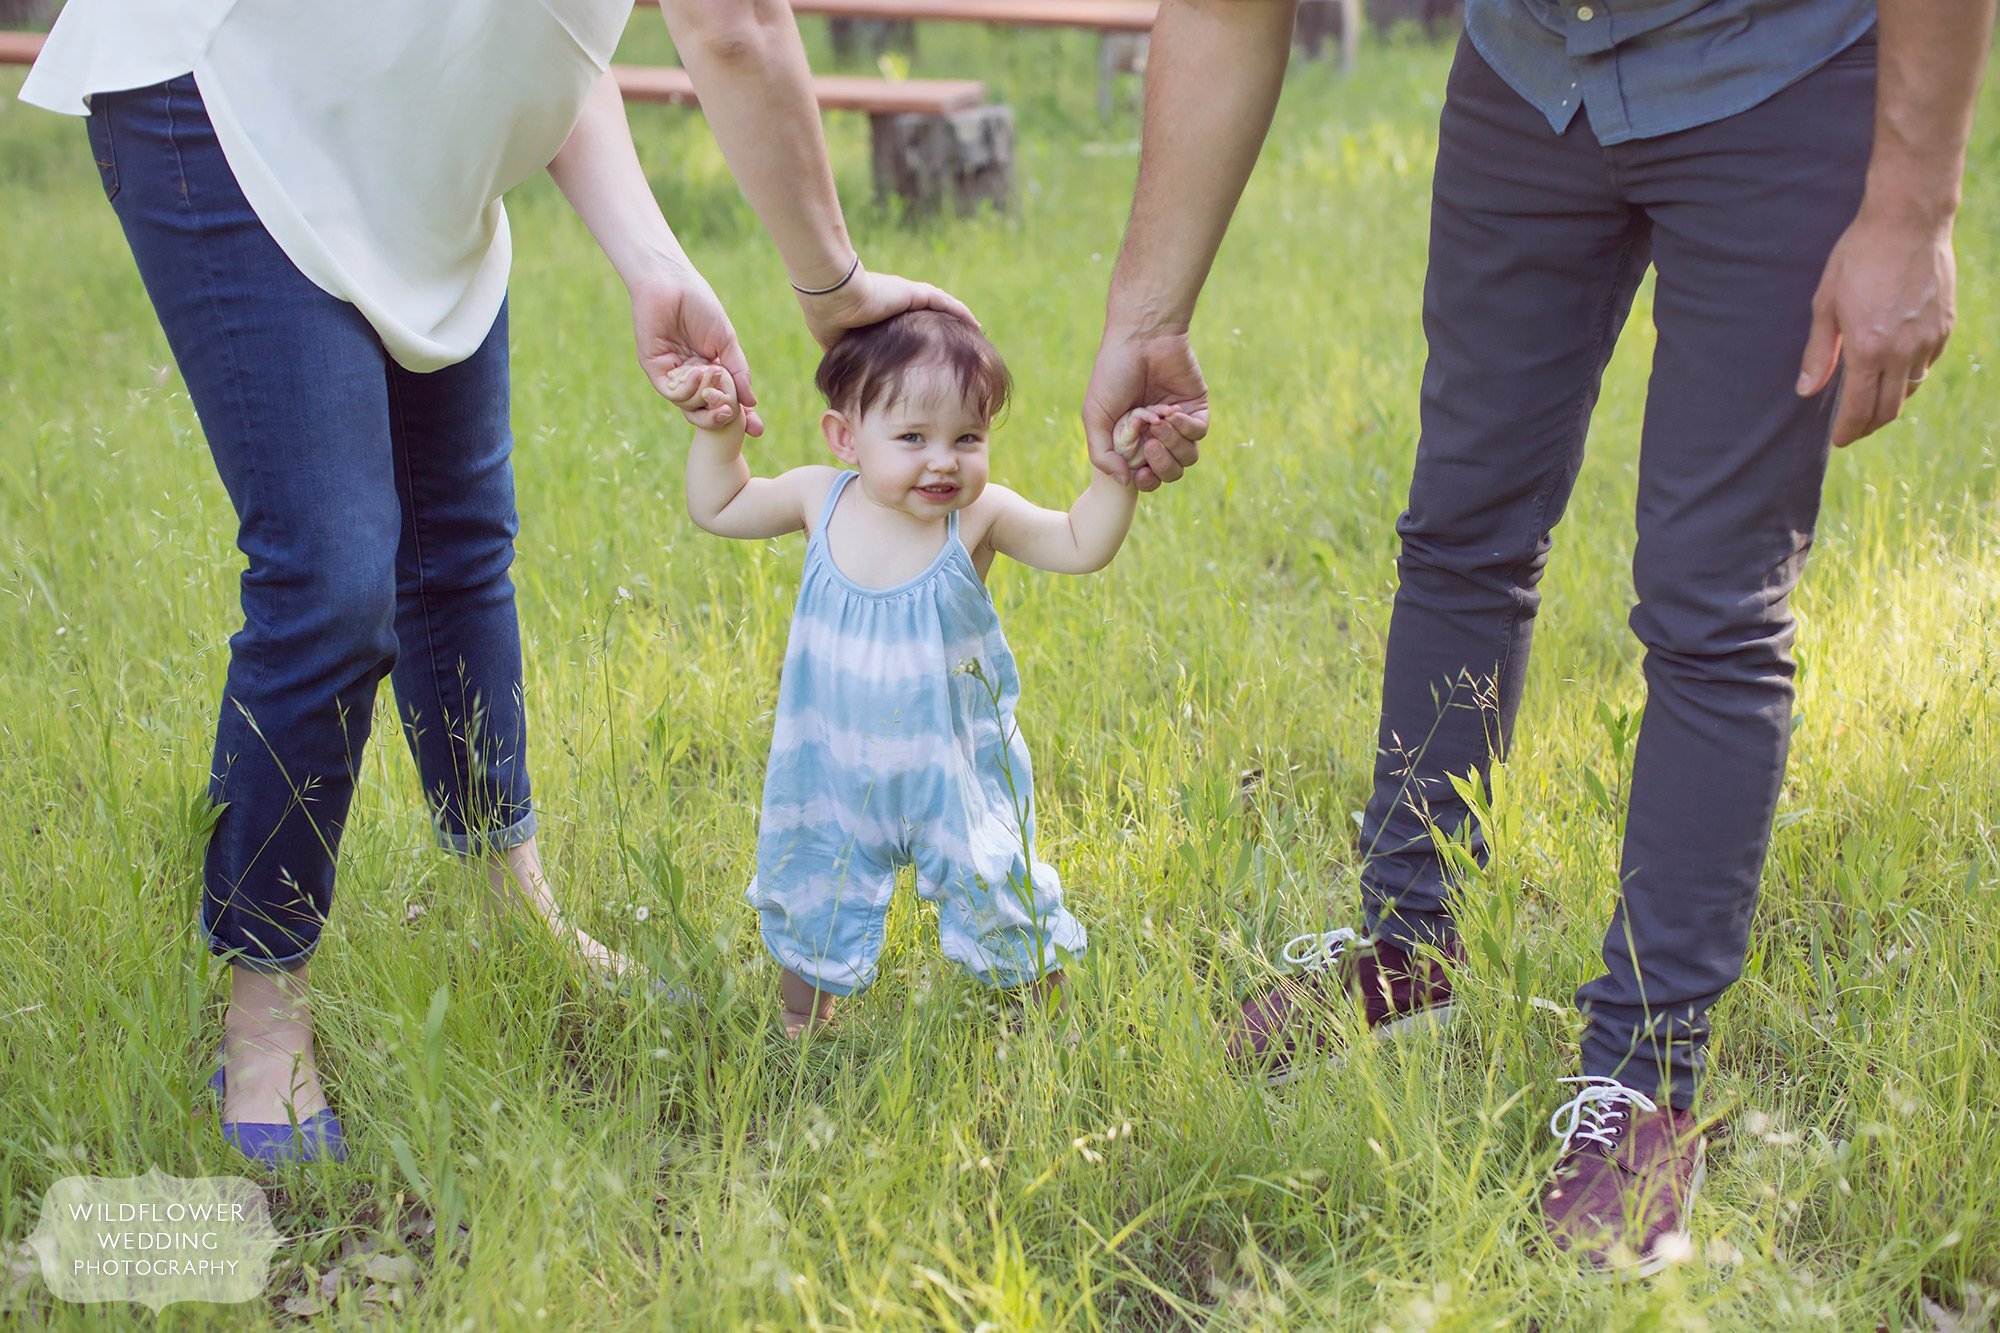 Sweet photo of an eight month old baby walking with help from mom and dad in a field.